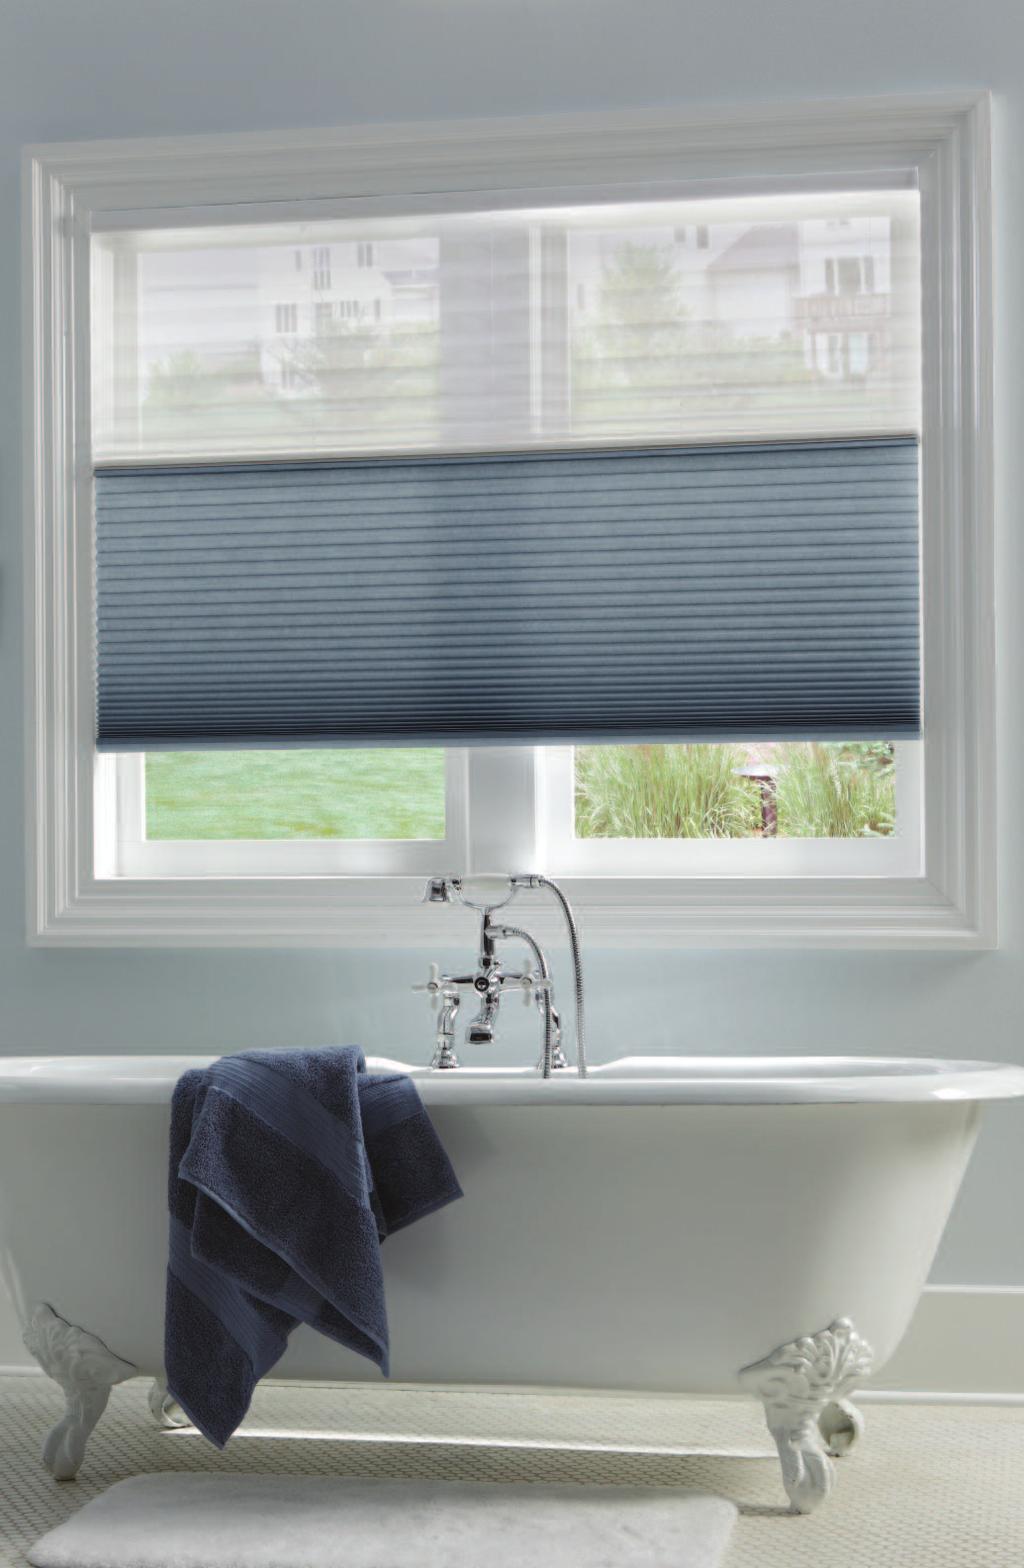 // TriLight Shades features & benefits The beautiful combination of a sheer pleated shade on top and honeycomb or 2" Hybrid Pleat shade on the bottom provides maximum versatility in a single window